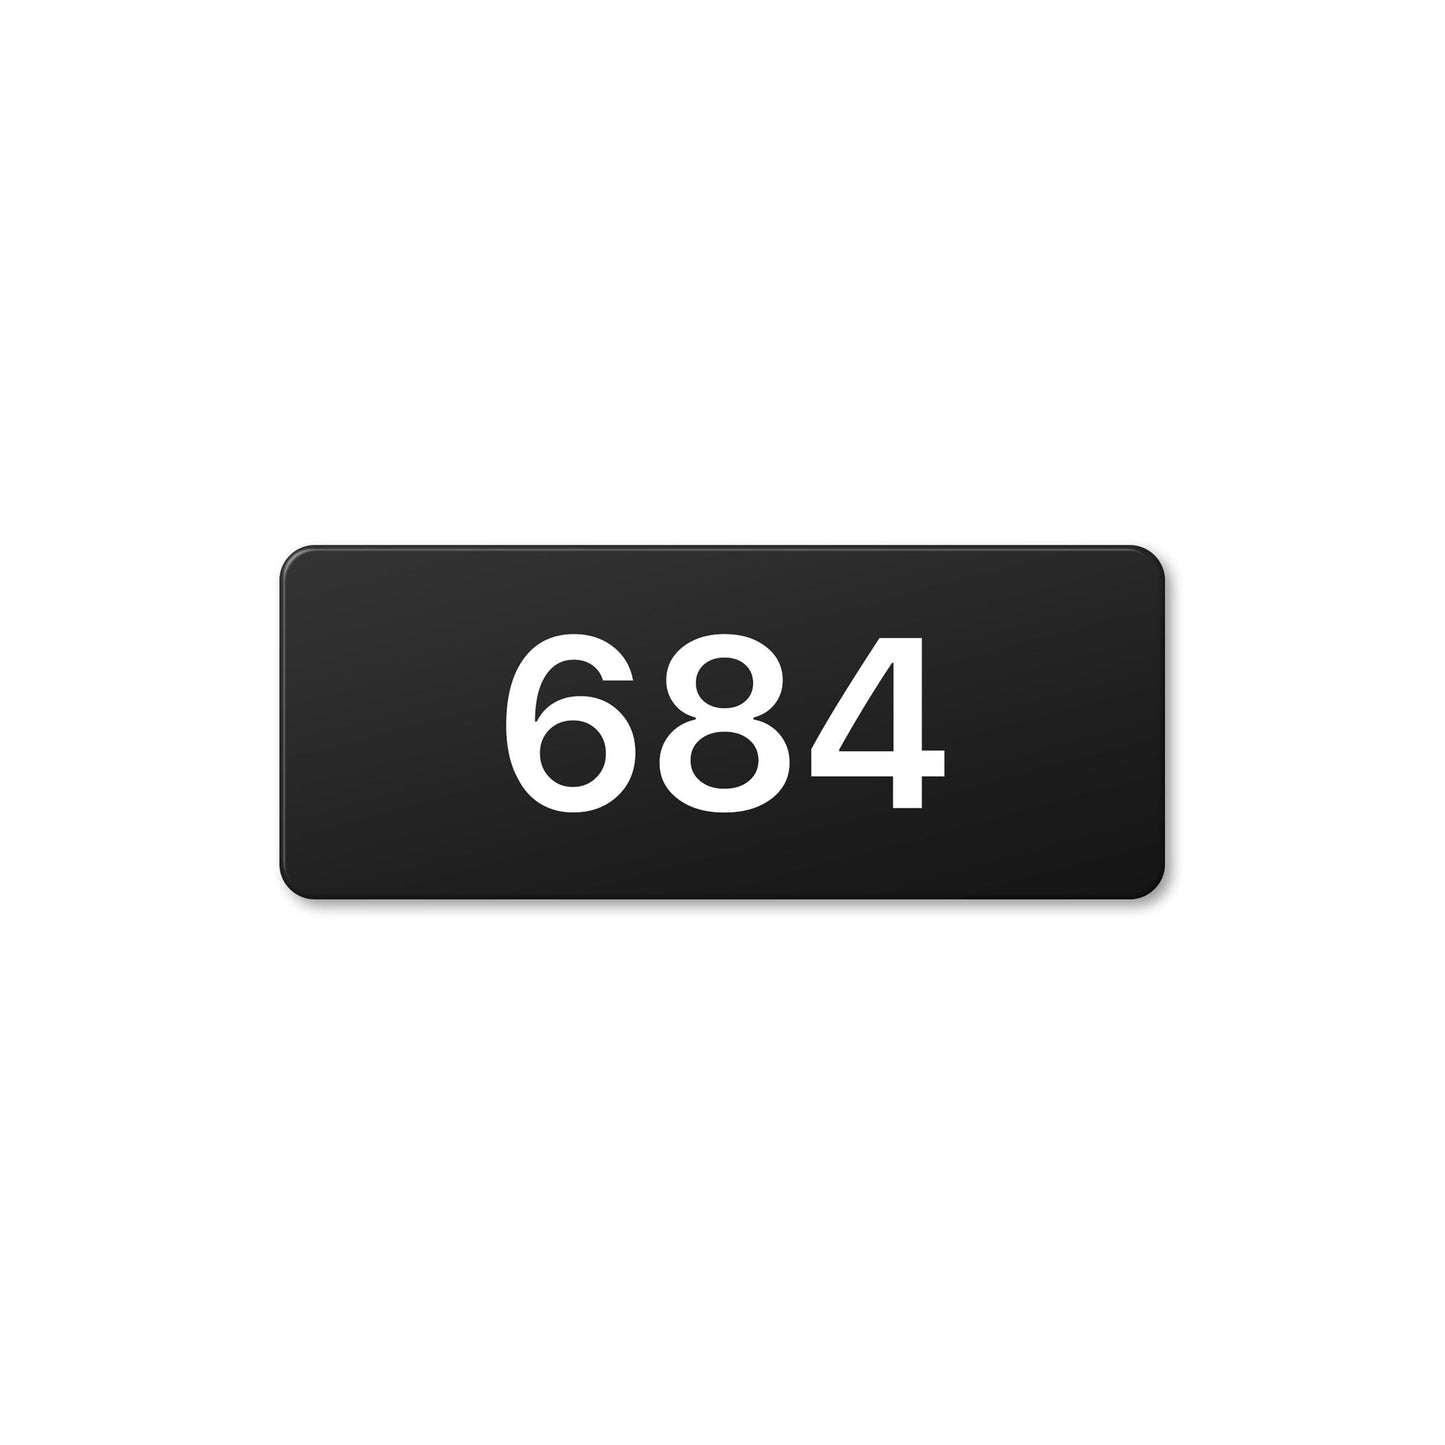 Numeral 684